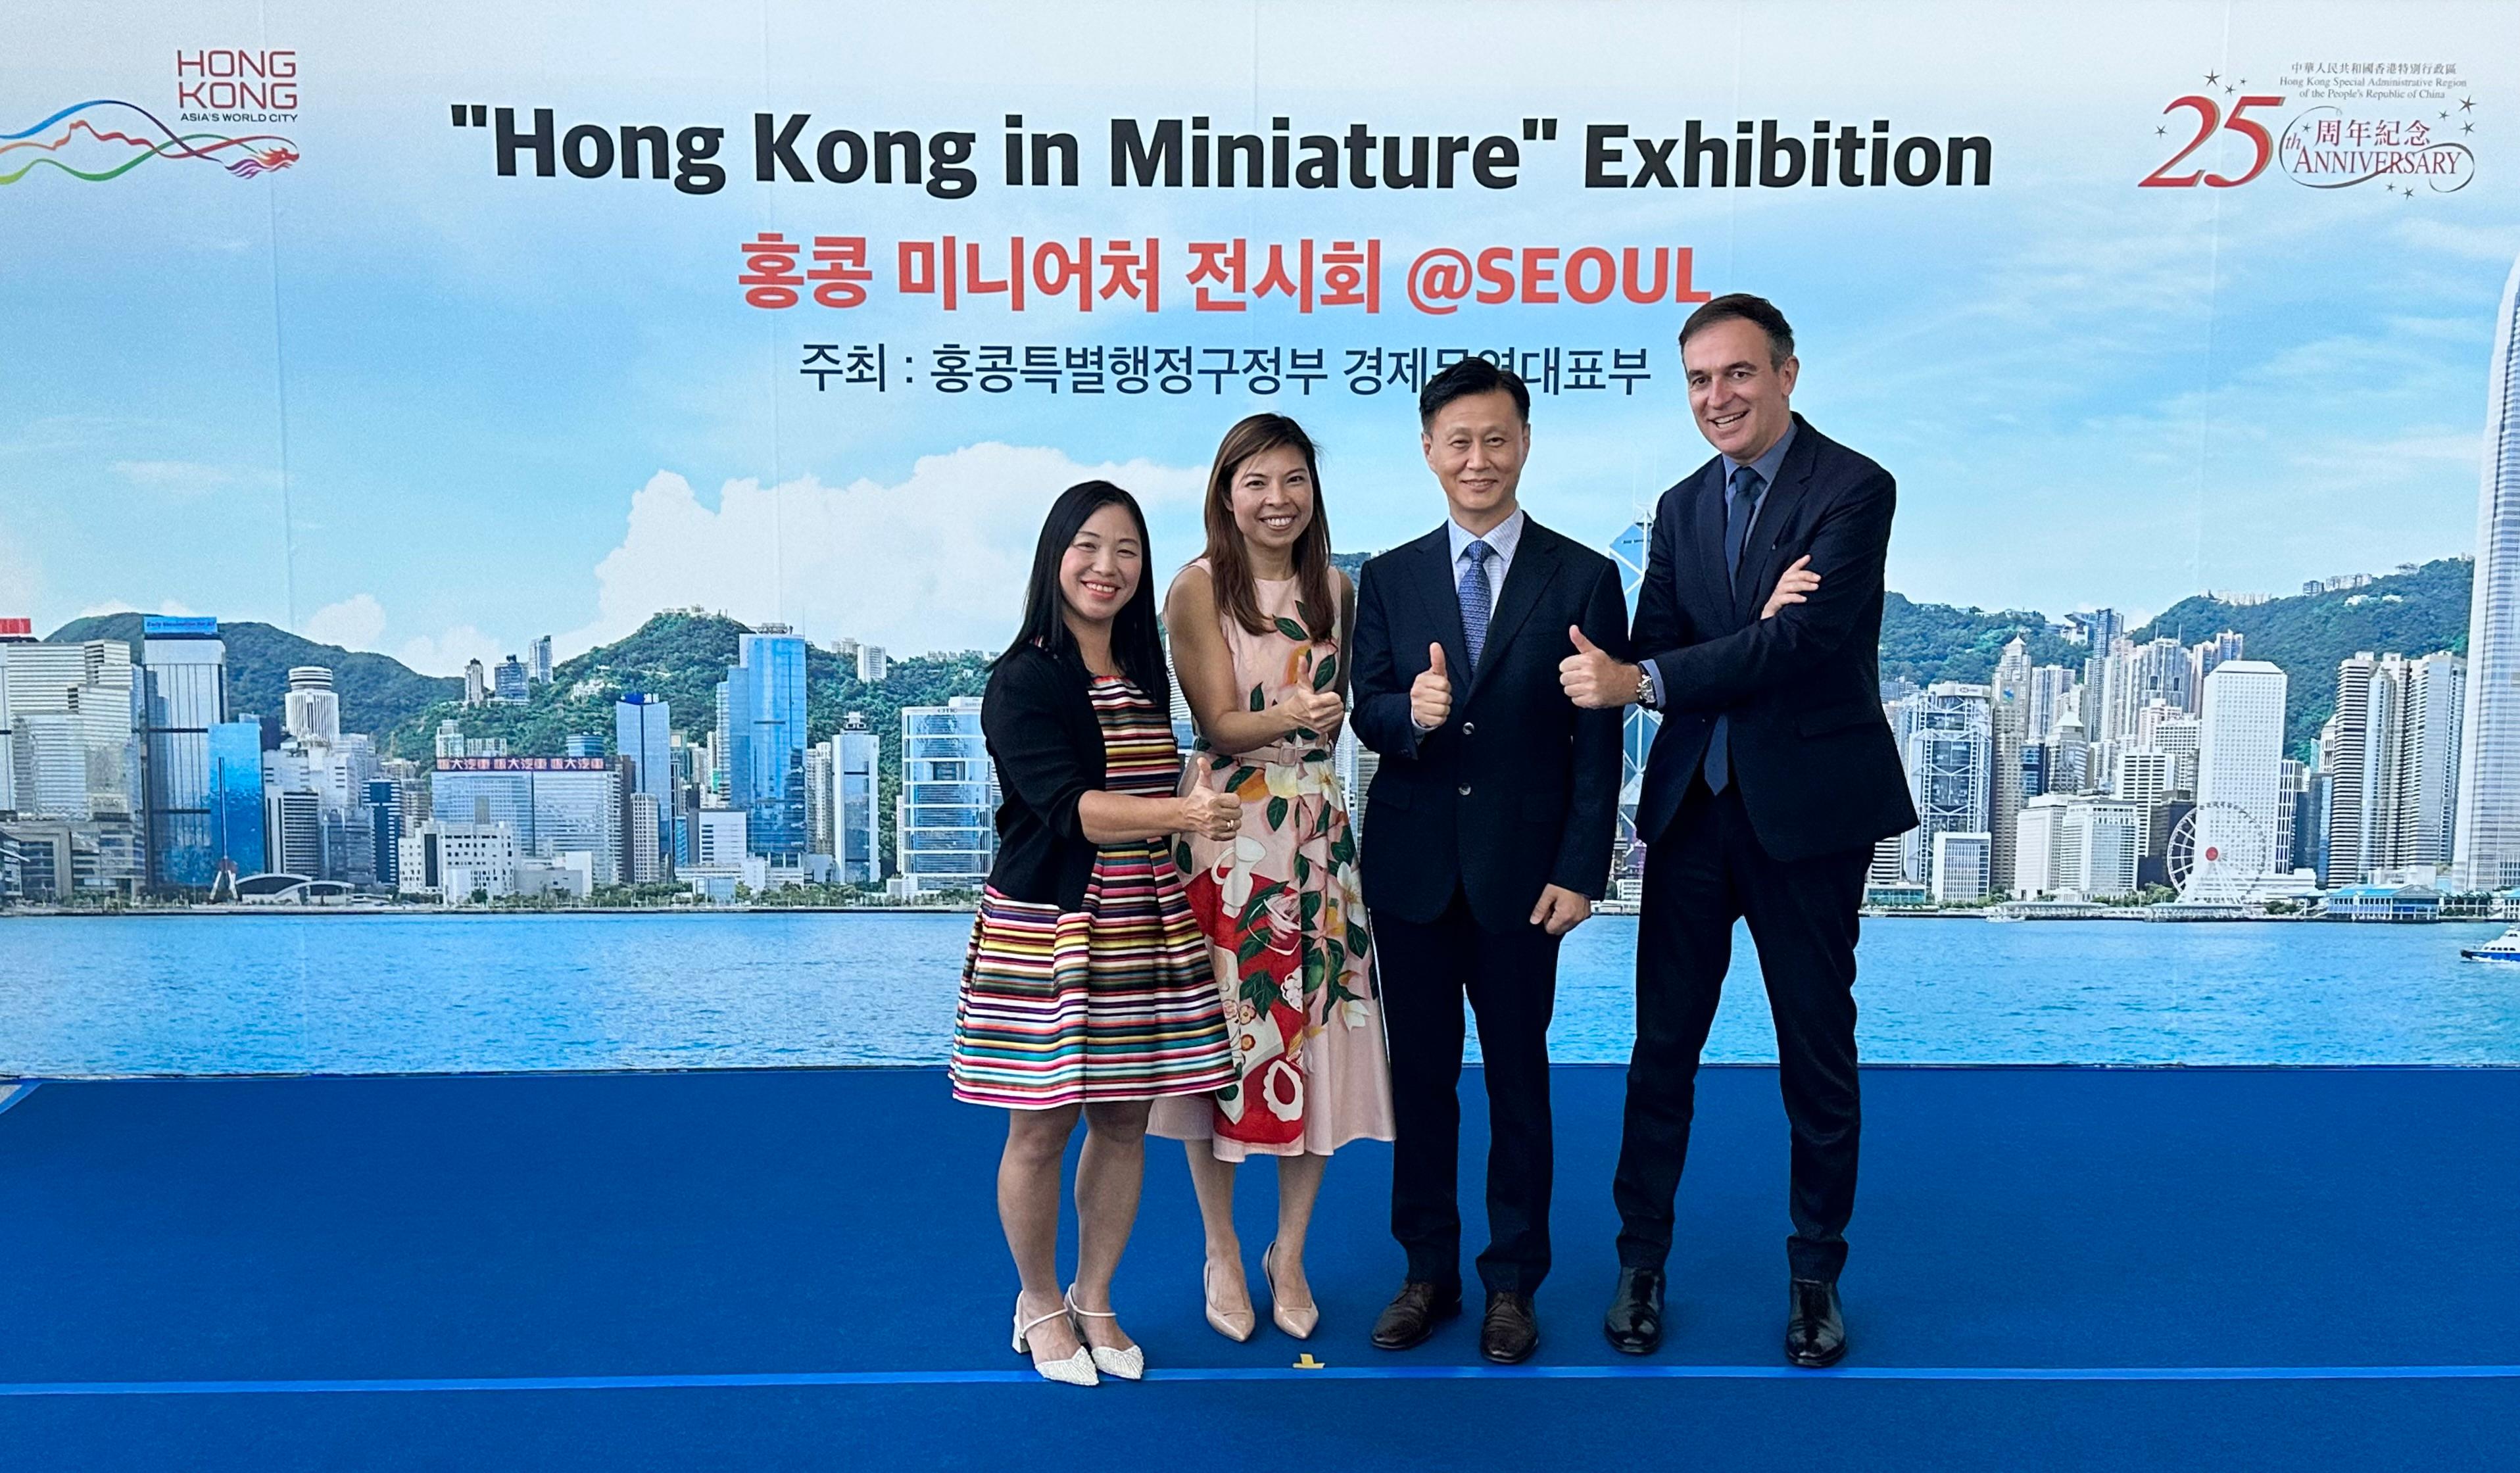 The "Hong Kong in Miniature" Exhibition @Seoul 2022, which showcases 40 miniature models that capture the uniqueness and vibrancy of Hong Kong, opened in Seoul, Korea, today (September 24). The Acting Principal Hong Kong Economic and Trade Representative (Tokyo), Miss Winsome Au (second left) is pictured with the Regional Director of Korea of the Hong Kong Tourism Board, Mr Kim Yoon-ho (second right); the Country Manager (Korea) of Cathay Pacific Airways, Mr Nicolas Masse  (first right); and the Chairman of the Joyful Miniature Association, Ms Carmen Poon (first left) at the opening ceremony.